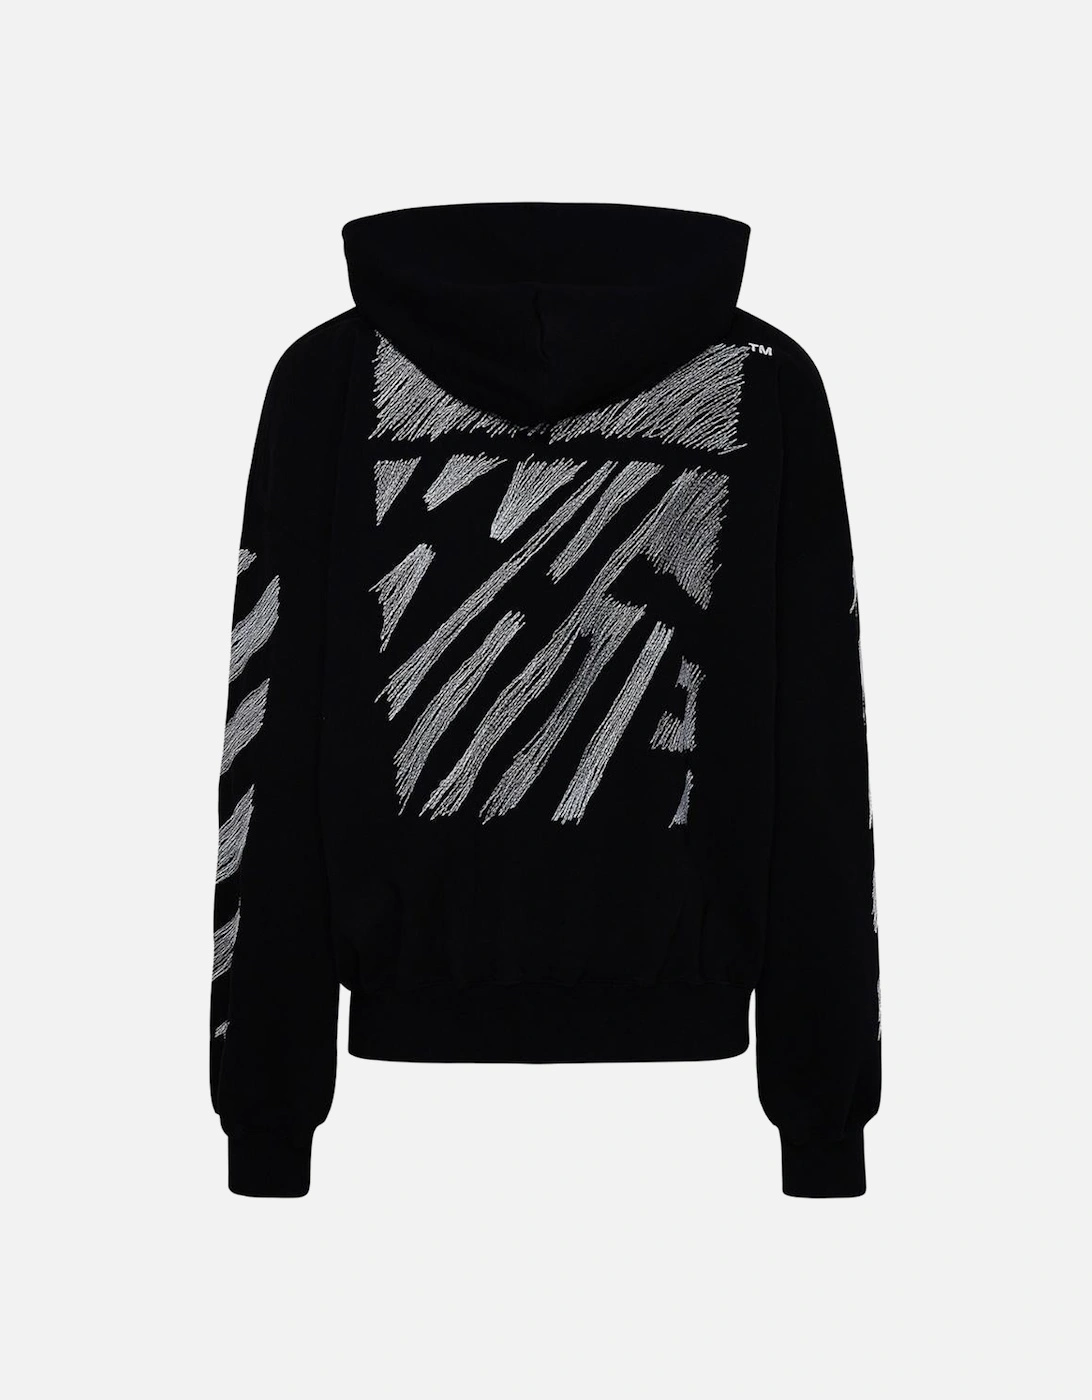 Scribble Diag Boxy Black Oversized Hoodie